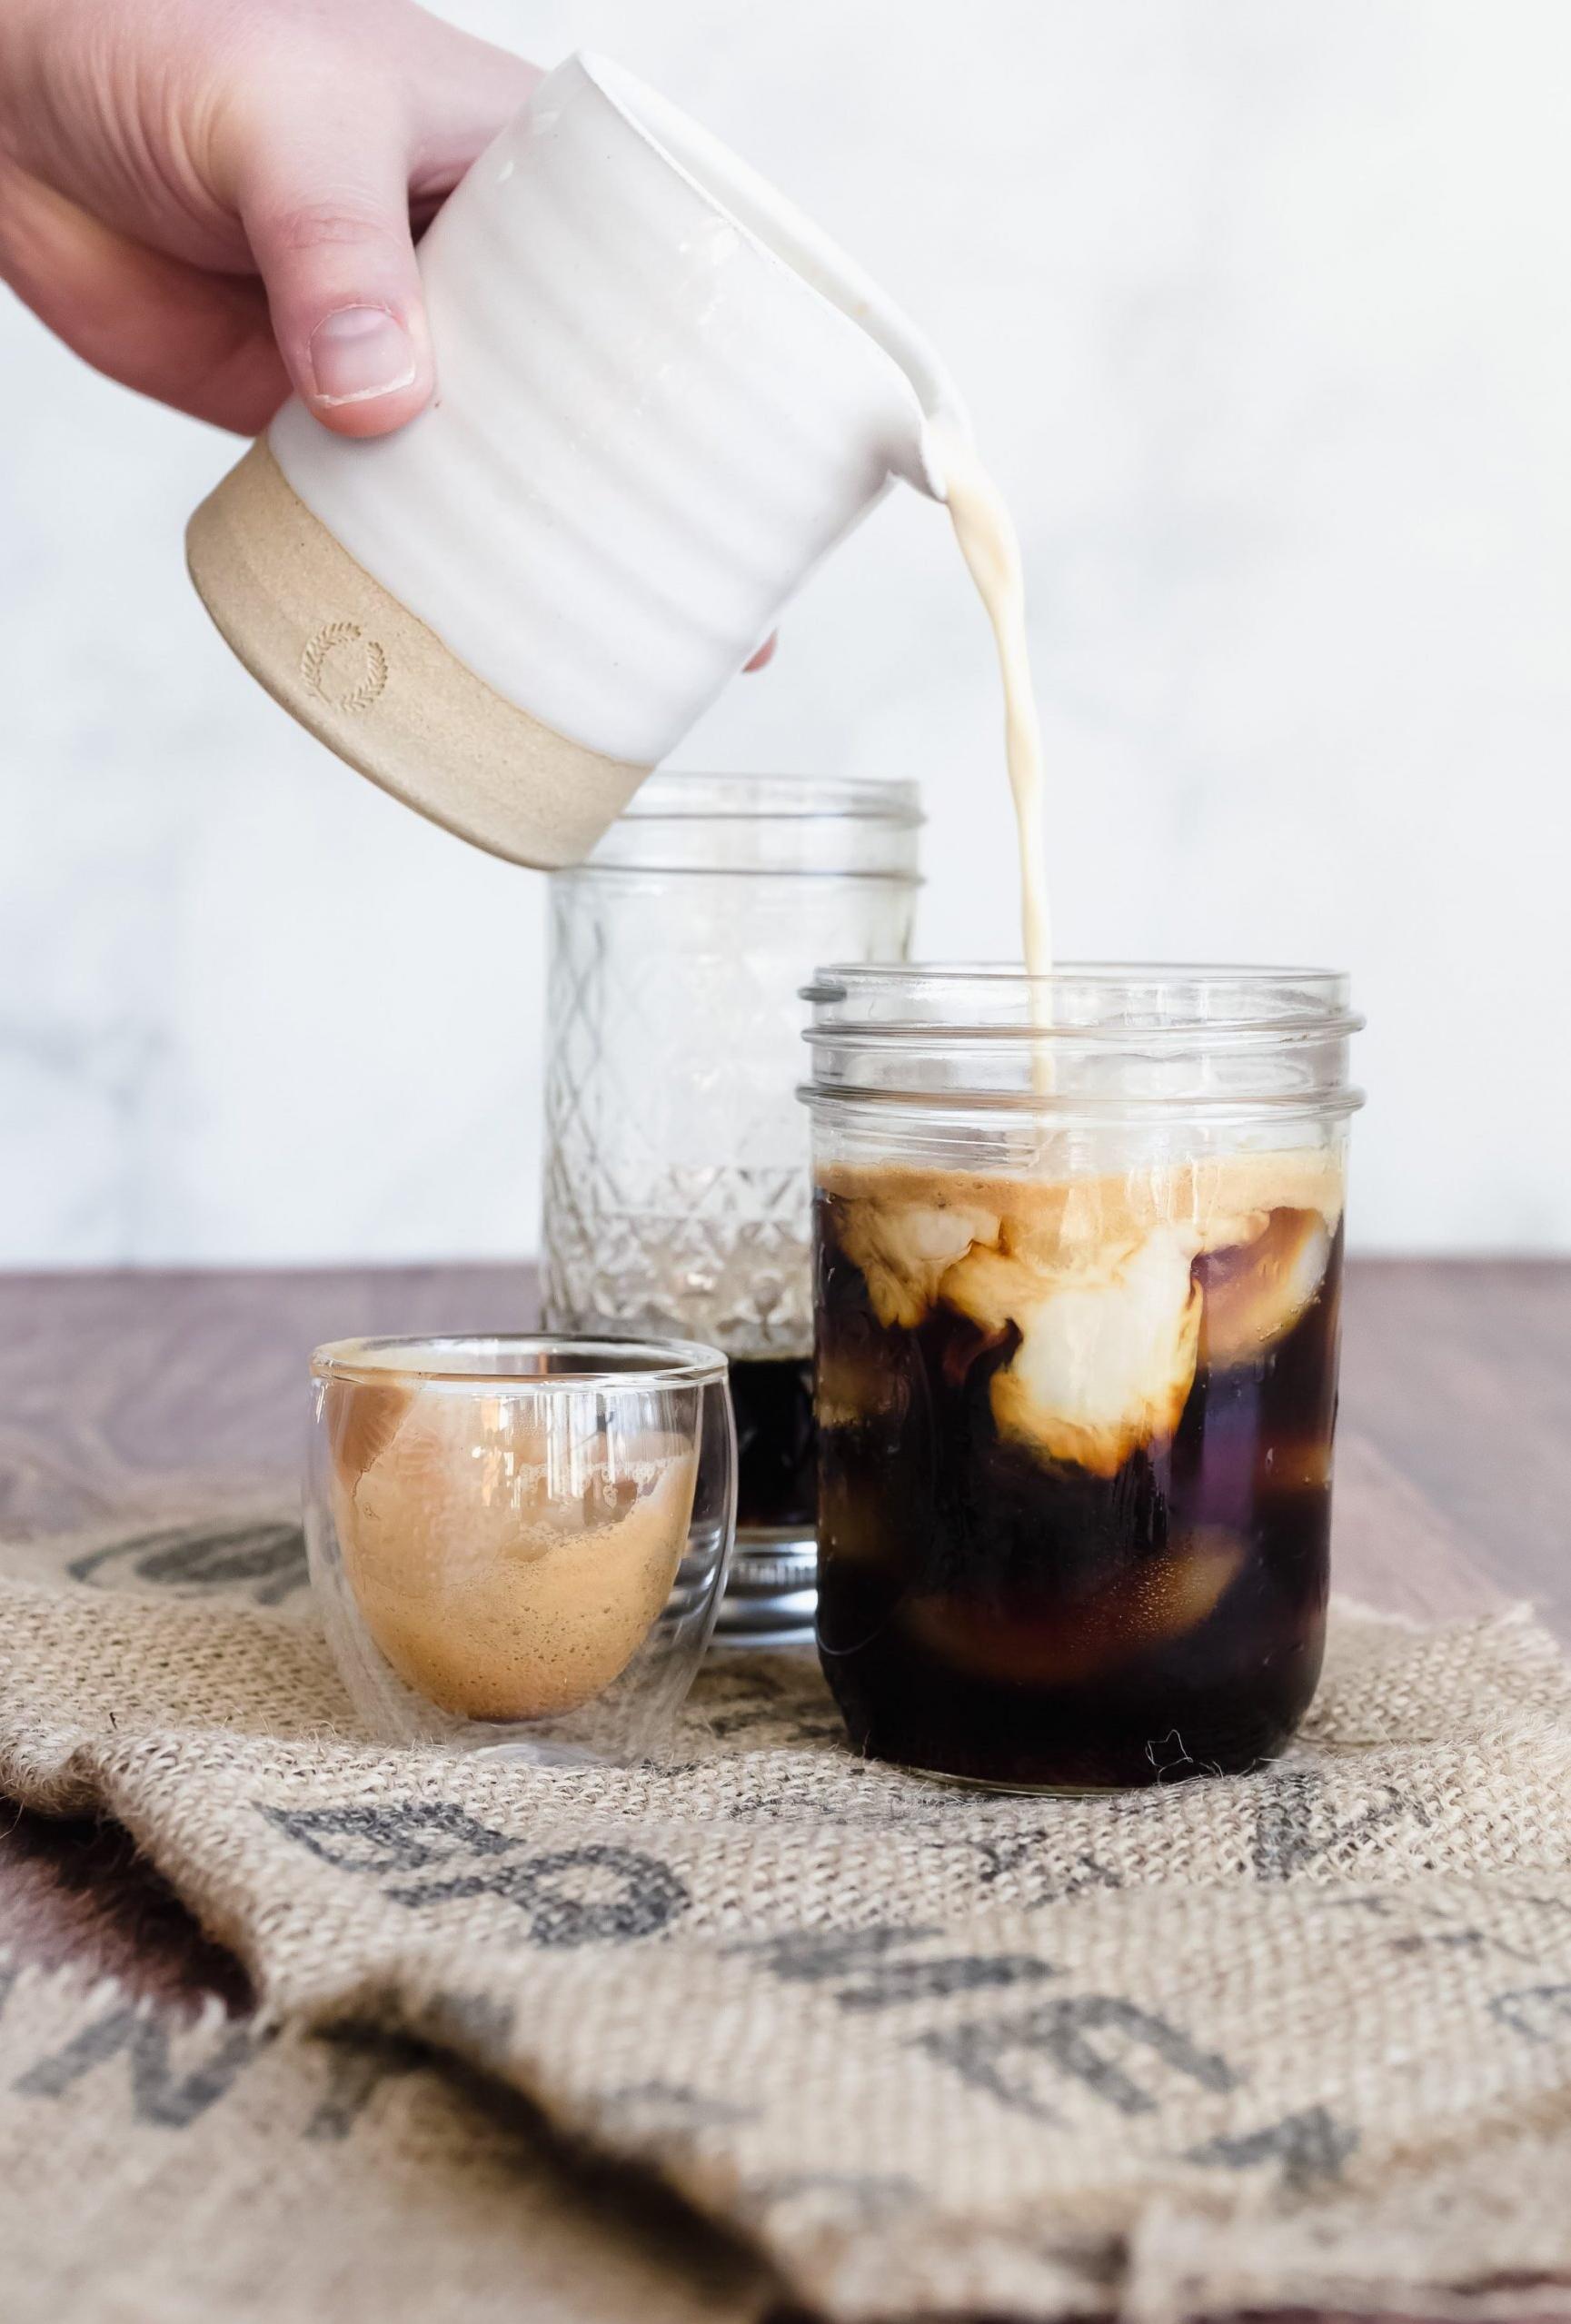 Satisfy Your Cravings with Iced Cafe Latte Recipe